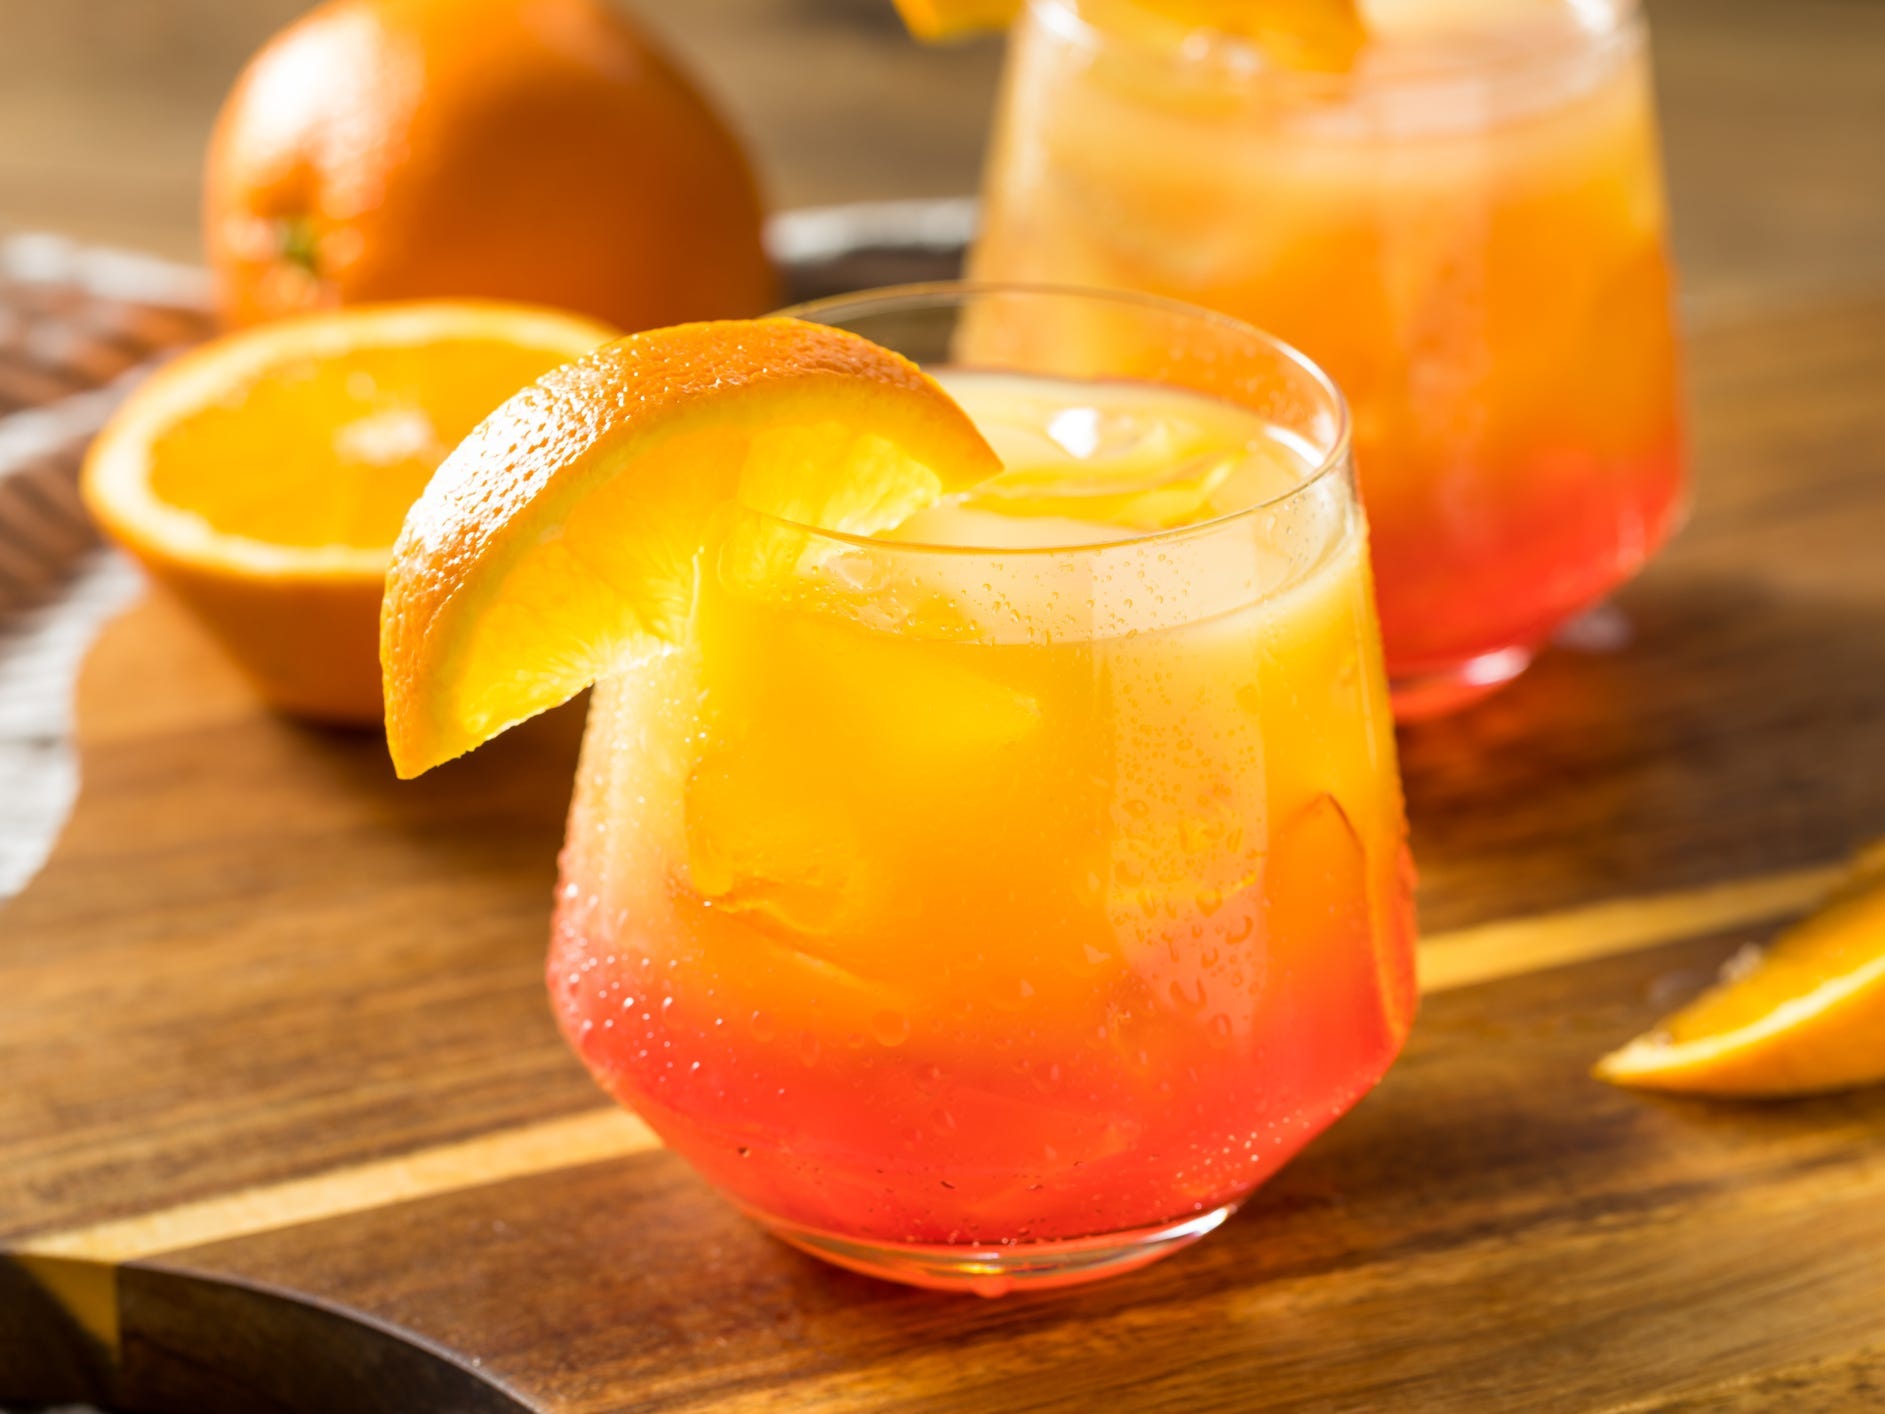 A tequila sunrise in a short glass over ice, garnished with an orange wedge